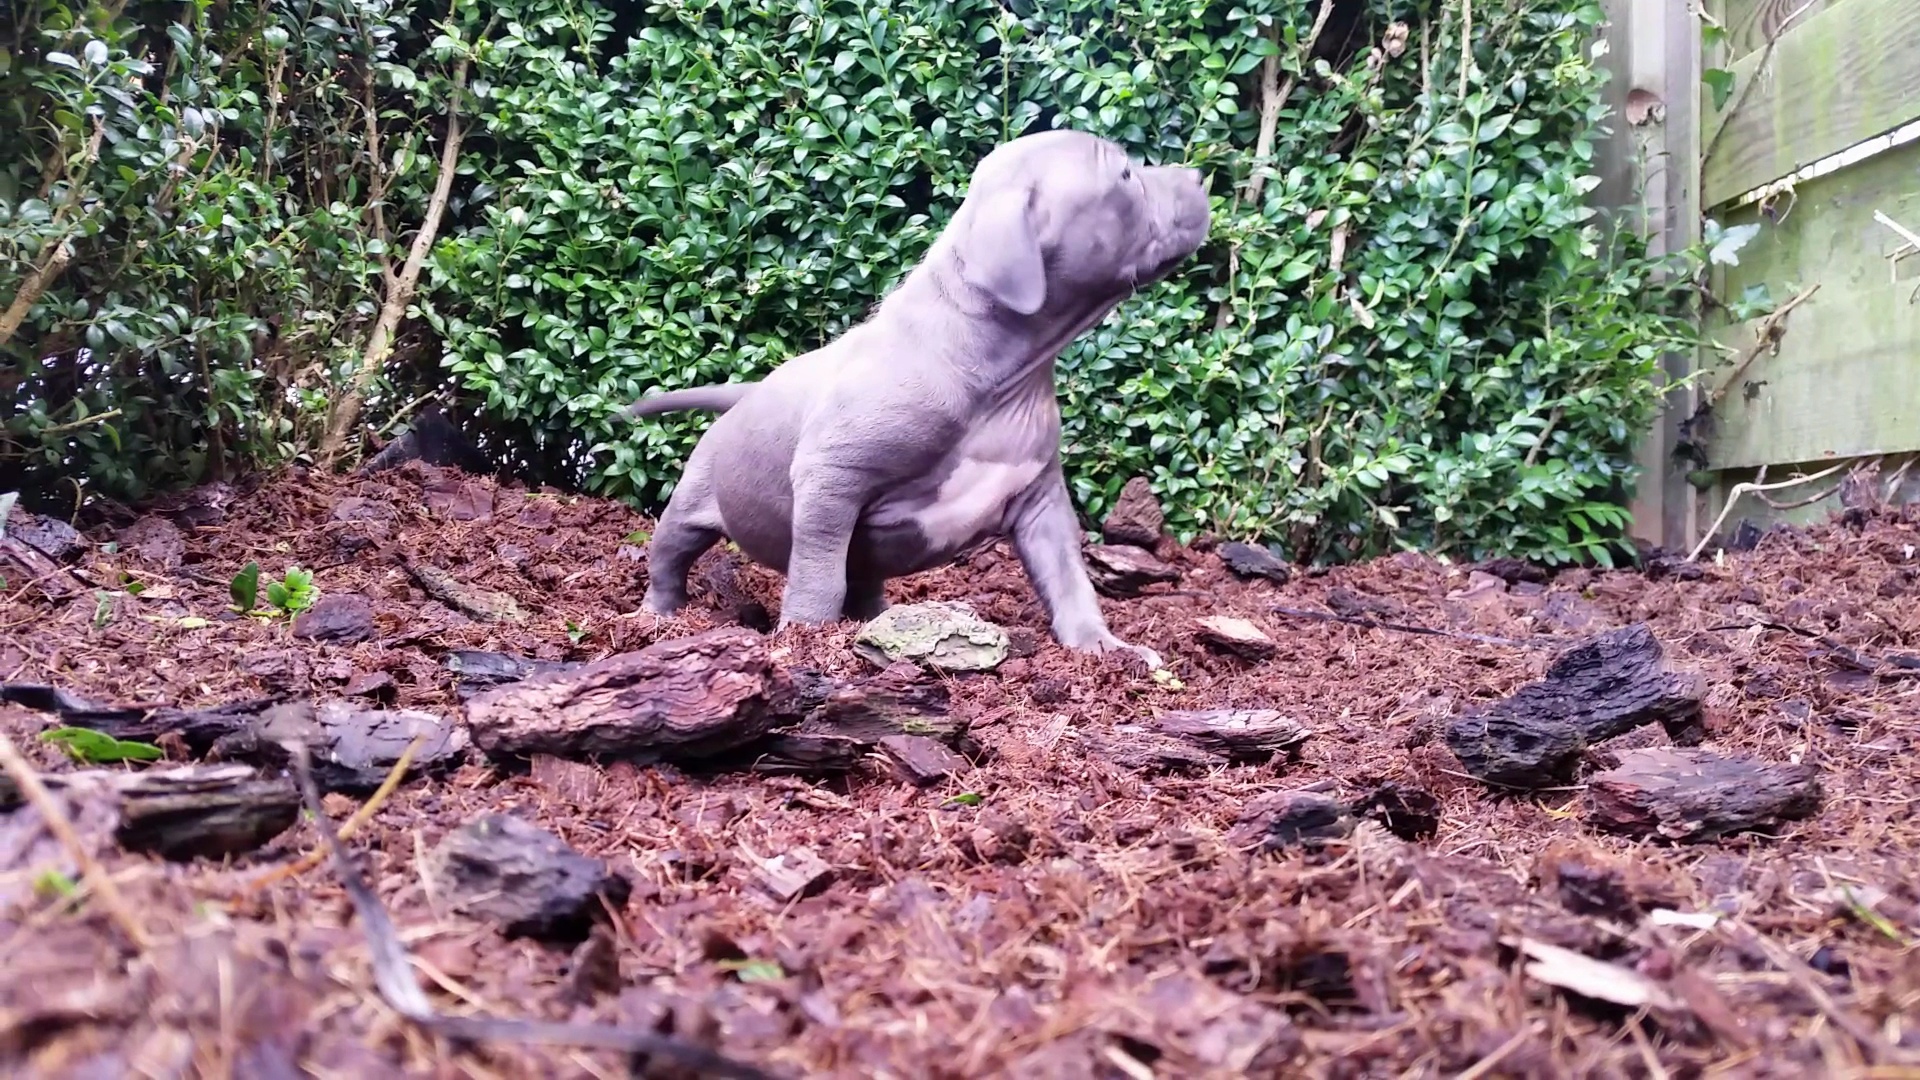 American Bully Kennel The Falcon - Lionheart Bloodline